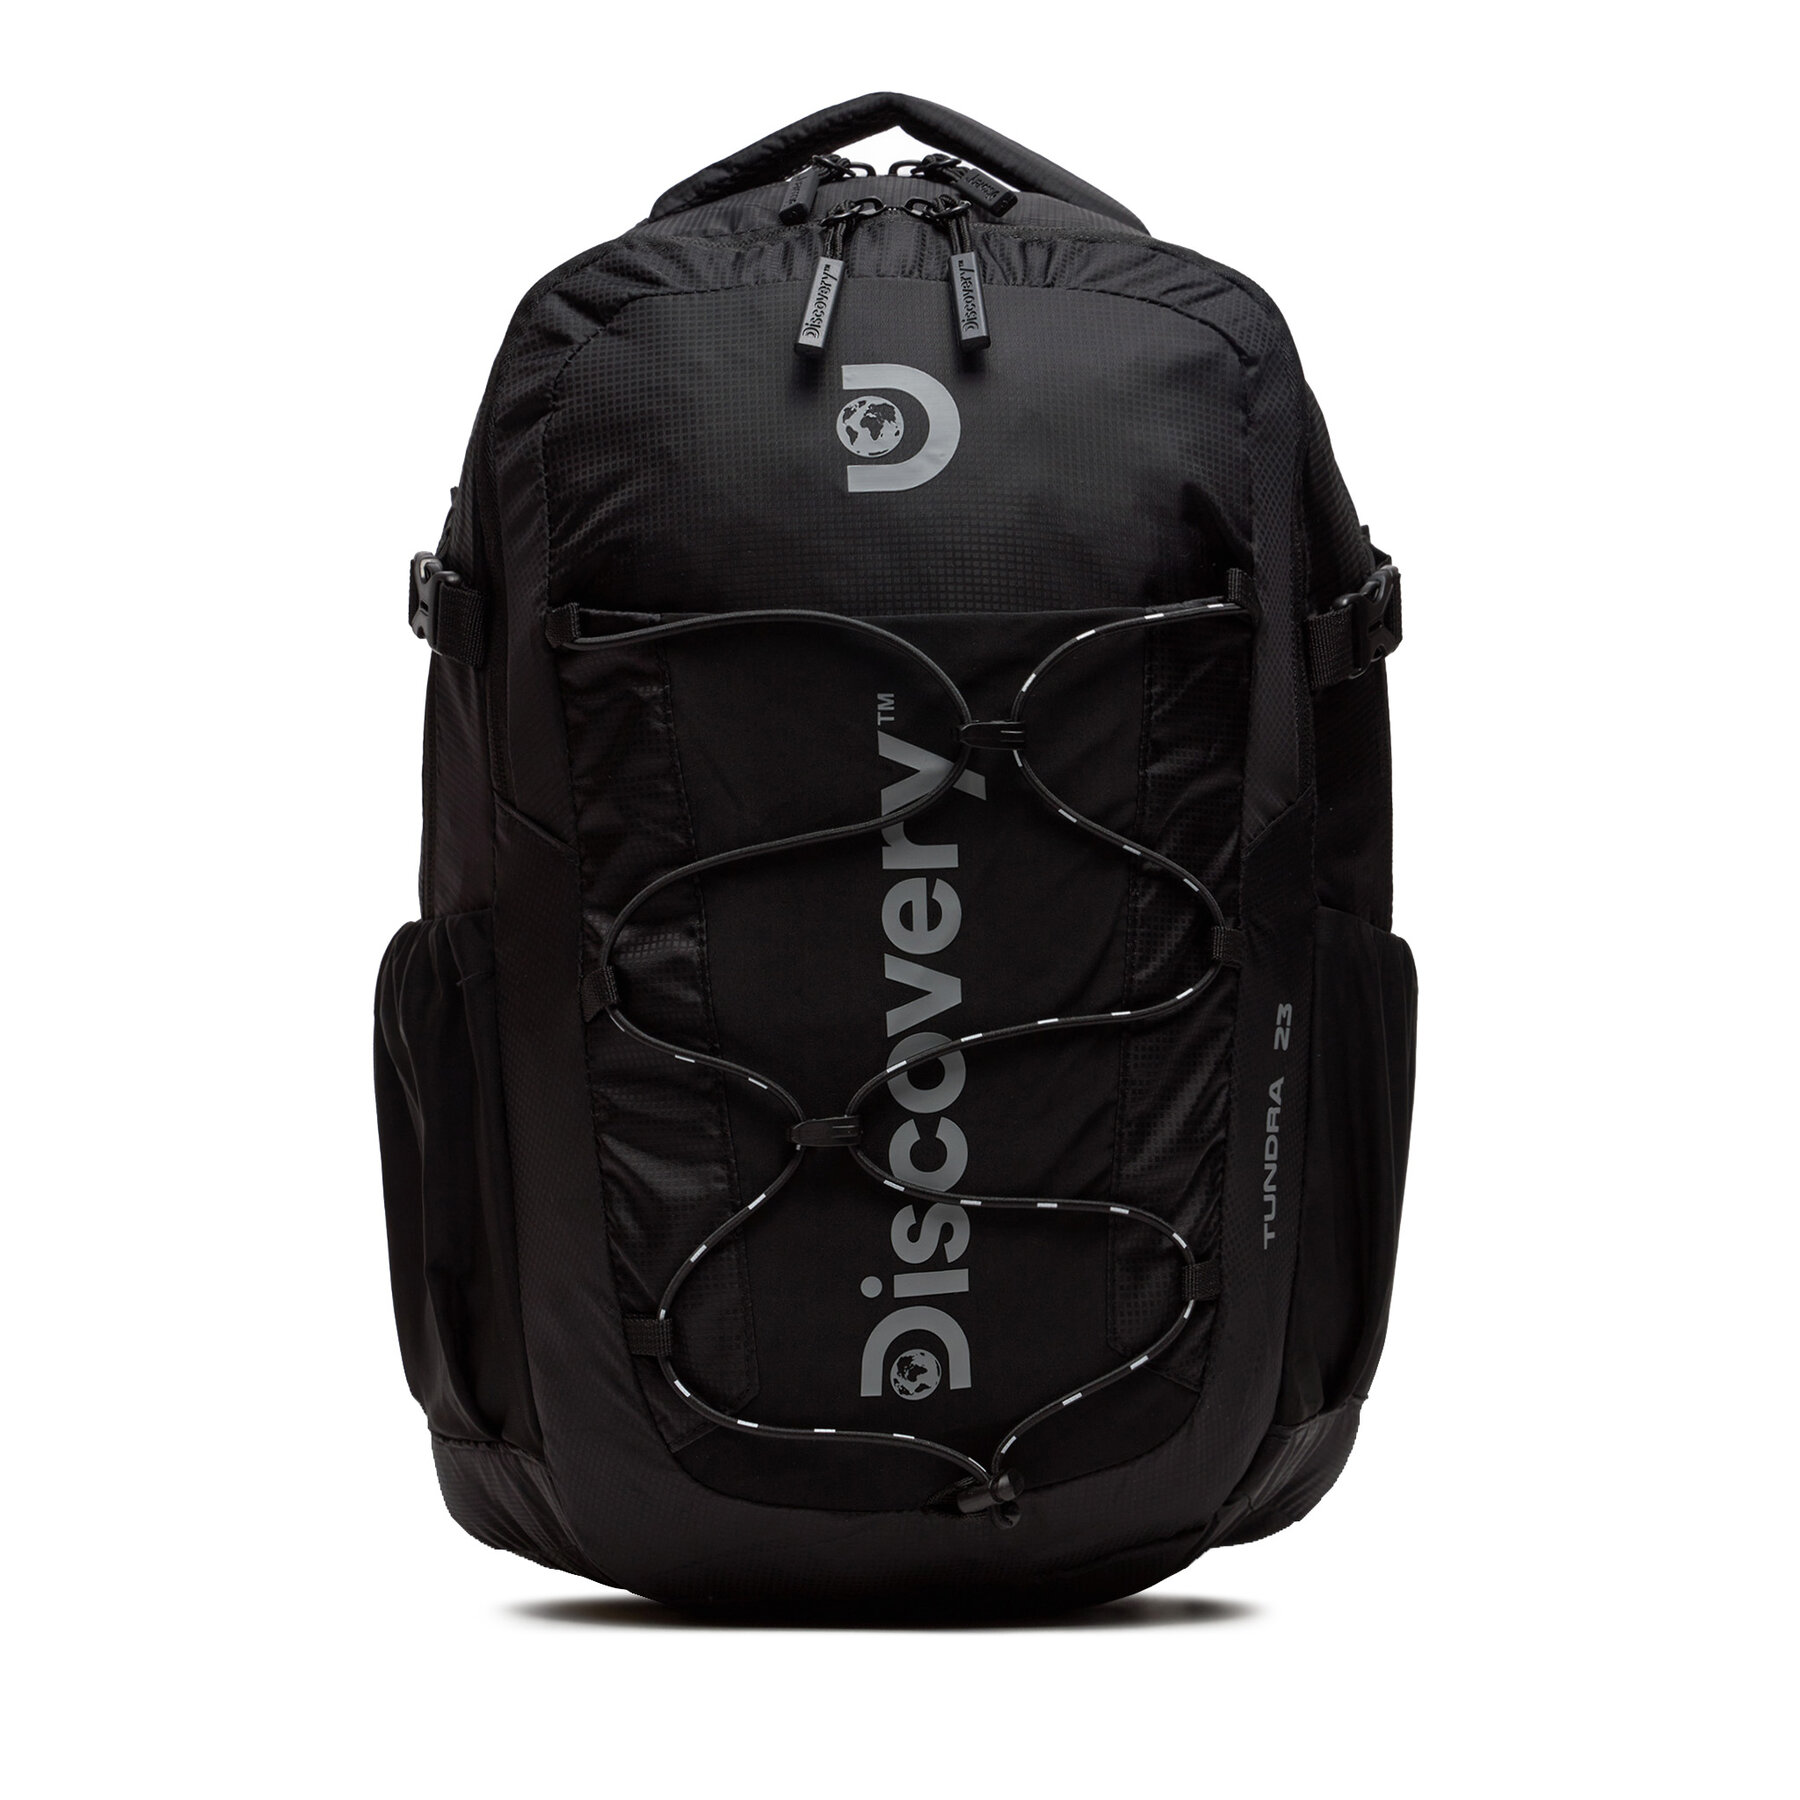 Rucksack Discovery Tundra23 D00612.06 Black von Discovery